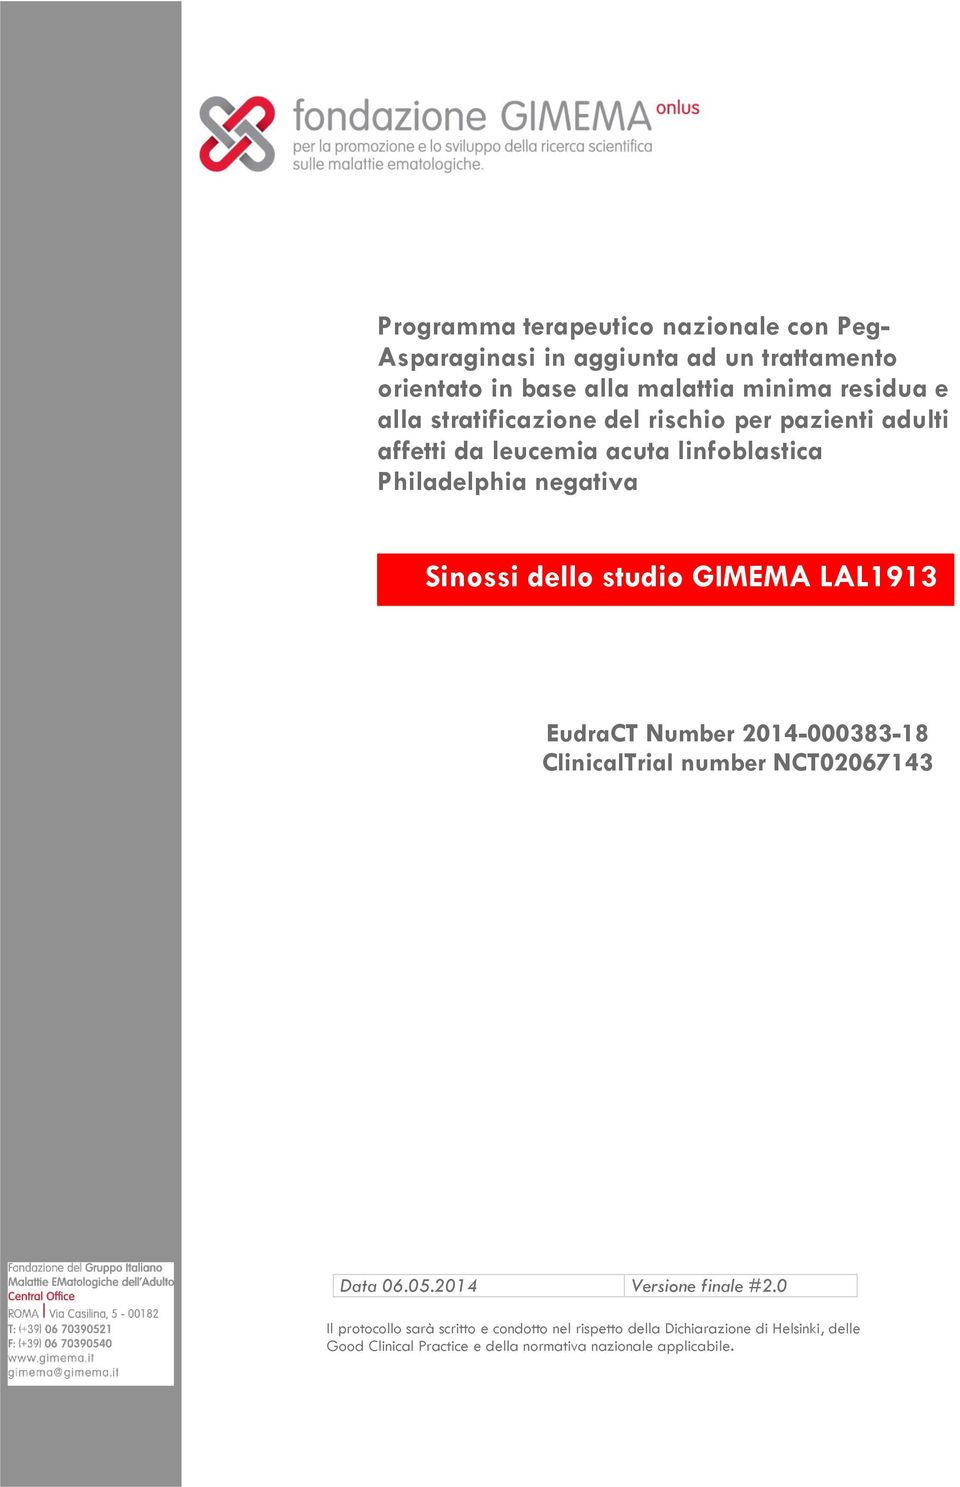 studio GIMEMA LAL1913 EudraCT Number 2014-000383-18 ClinicalTrial number NCT02067143 Versione finale #2.